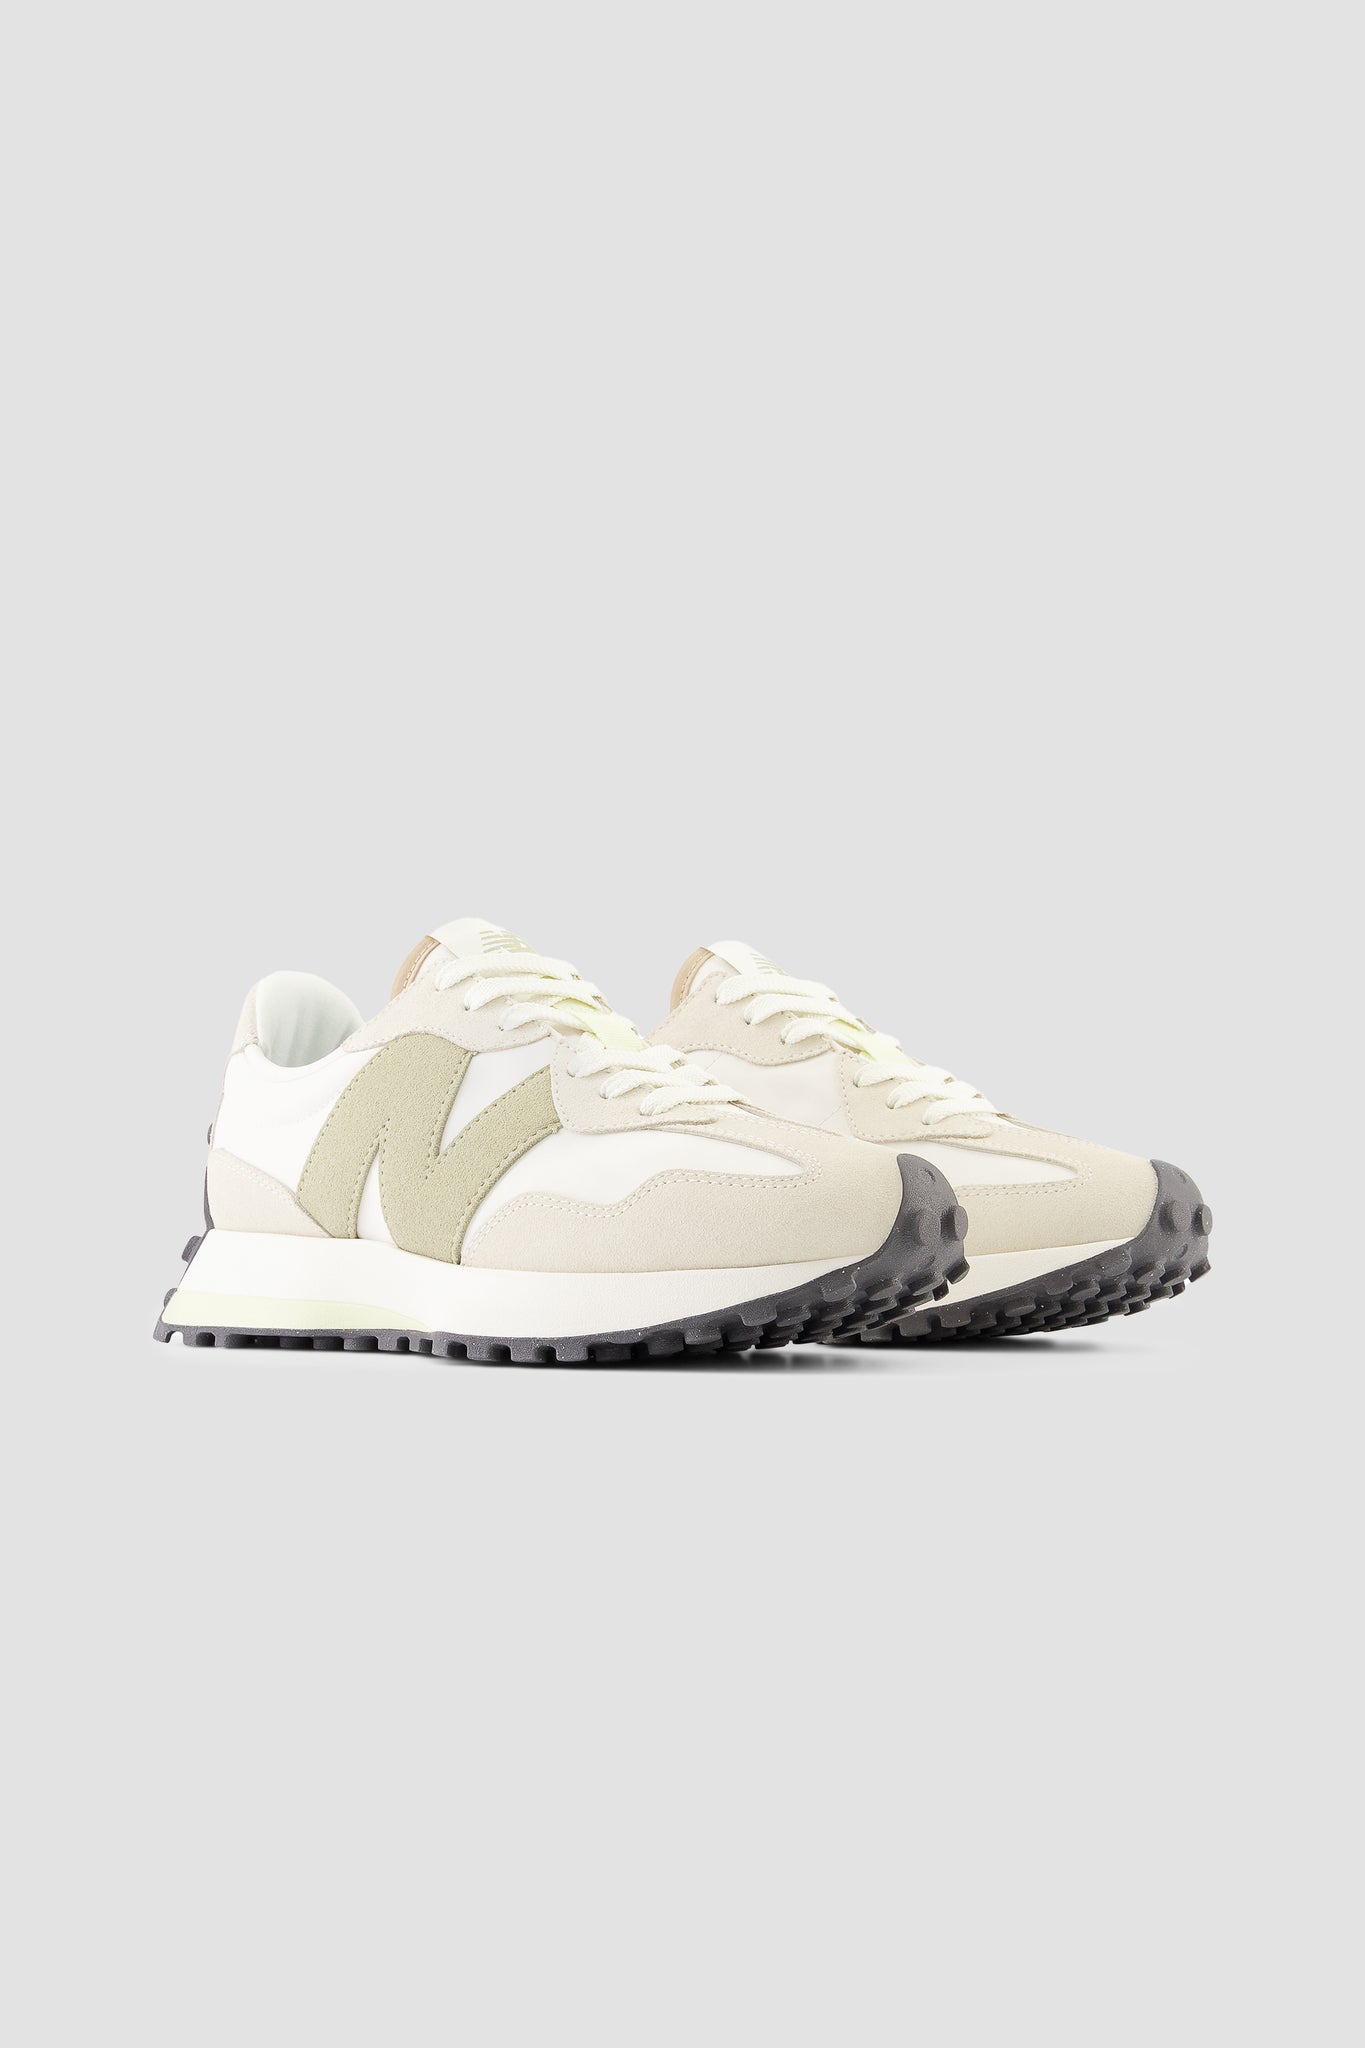 New Balance Women's 327 Sneaker in Turtledove with fatigue green